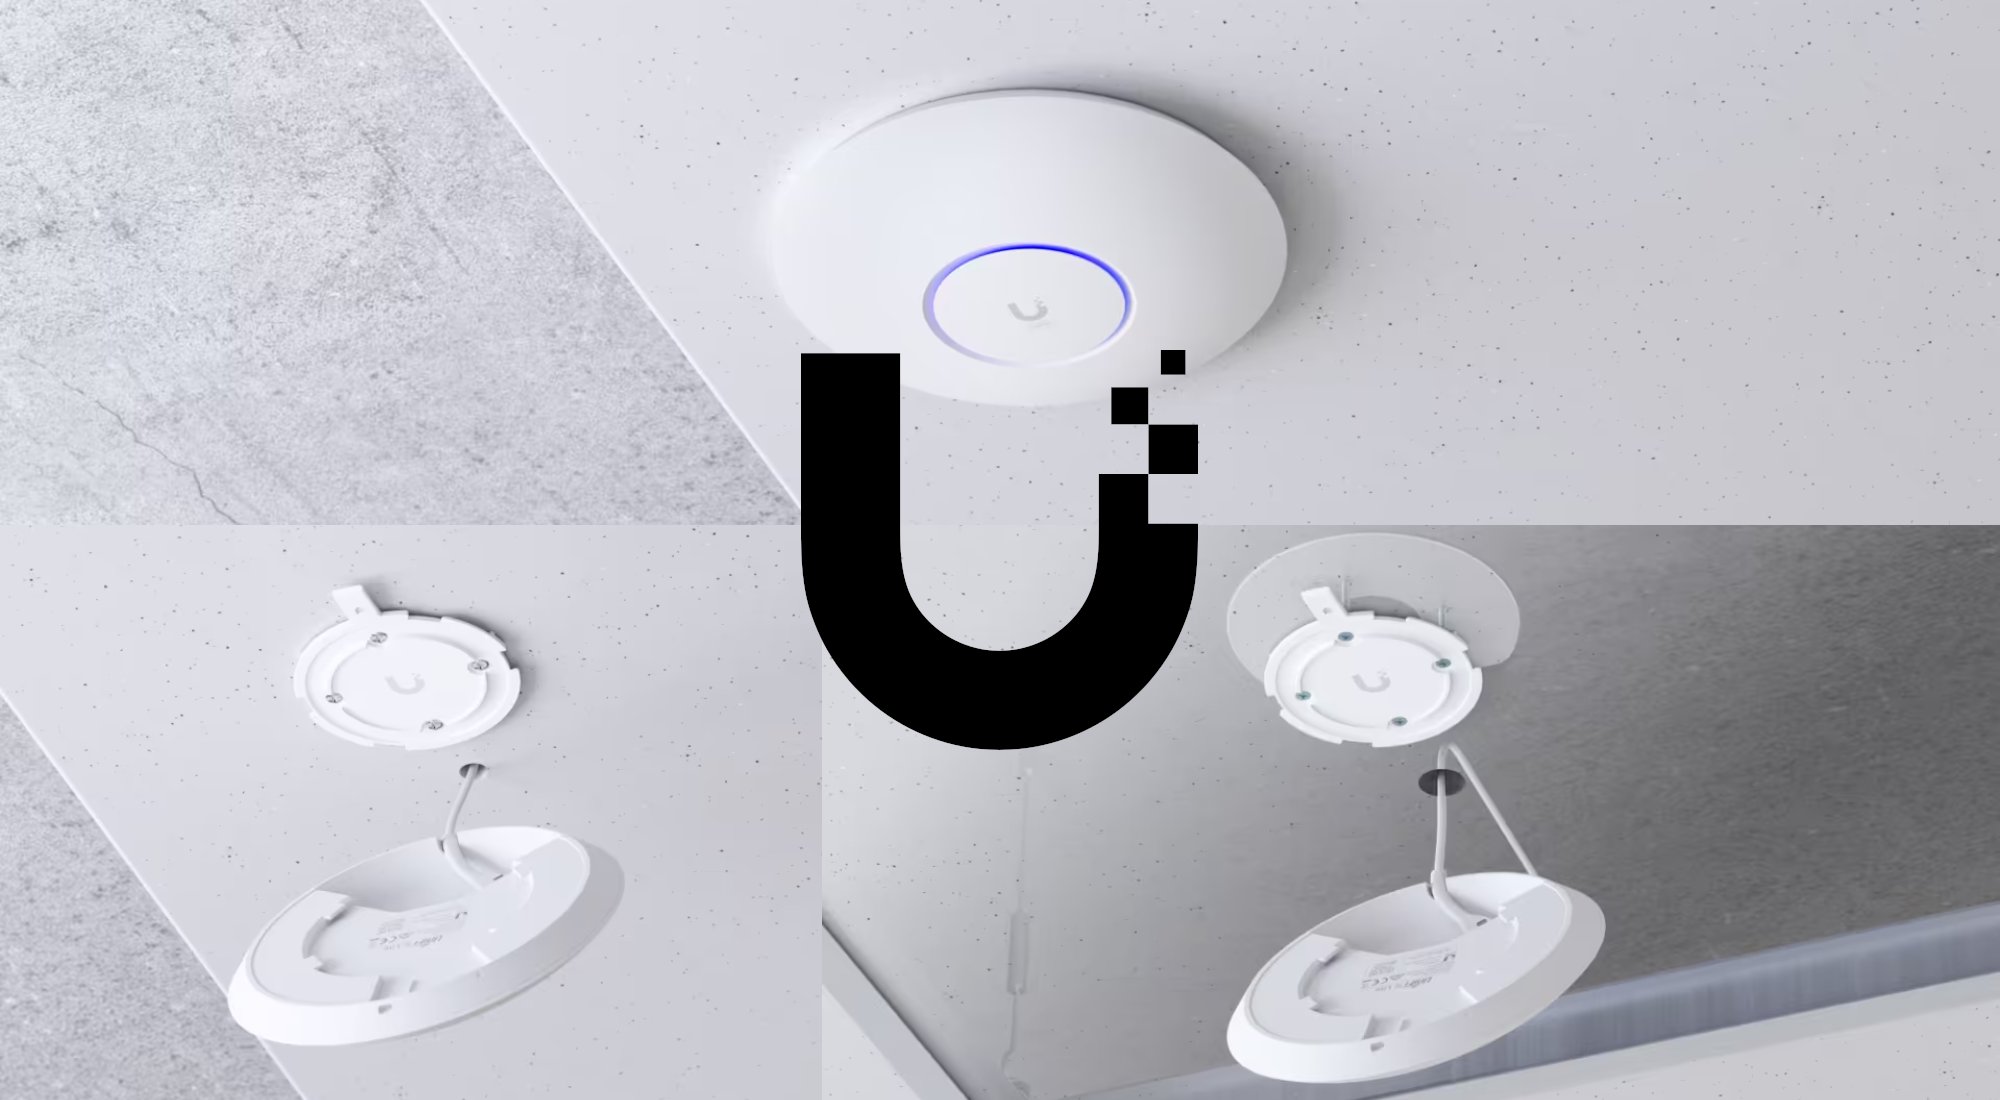 How to Set Up and Configure Your Ubiquiti Access Point for Optimal Performance?